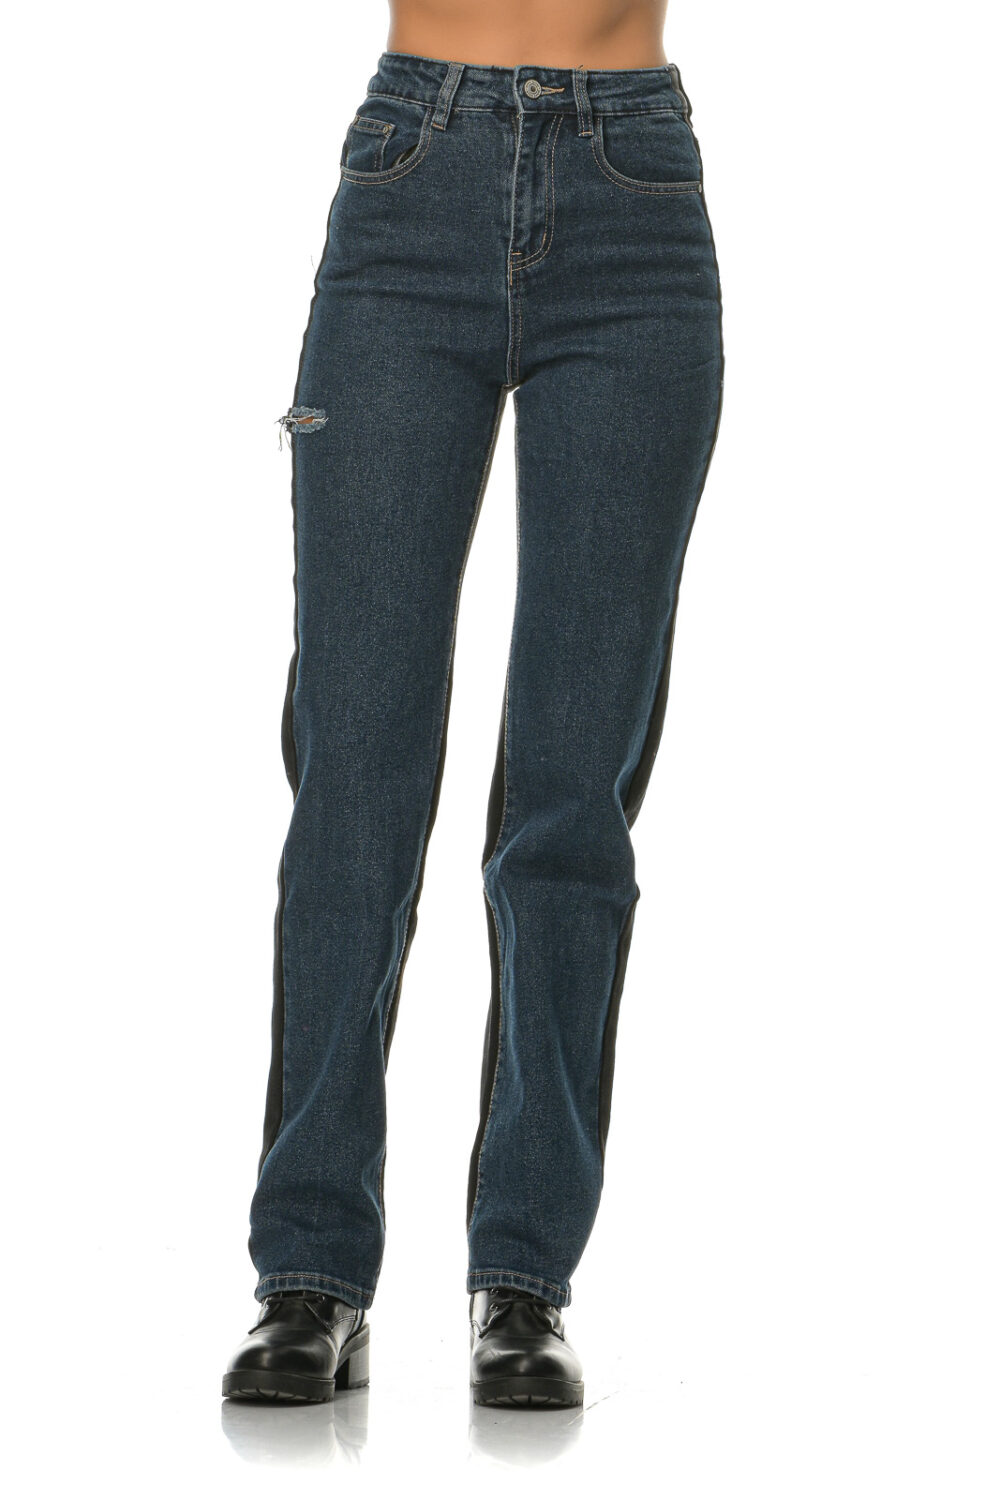 Double high waisted elastic jeans (blue front and black back)